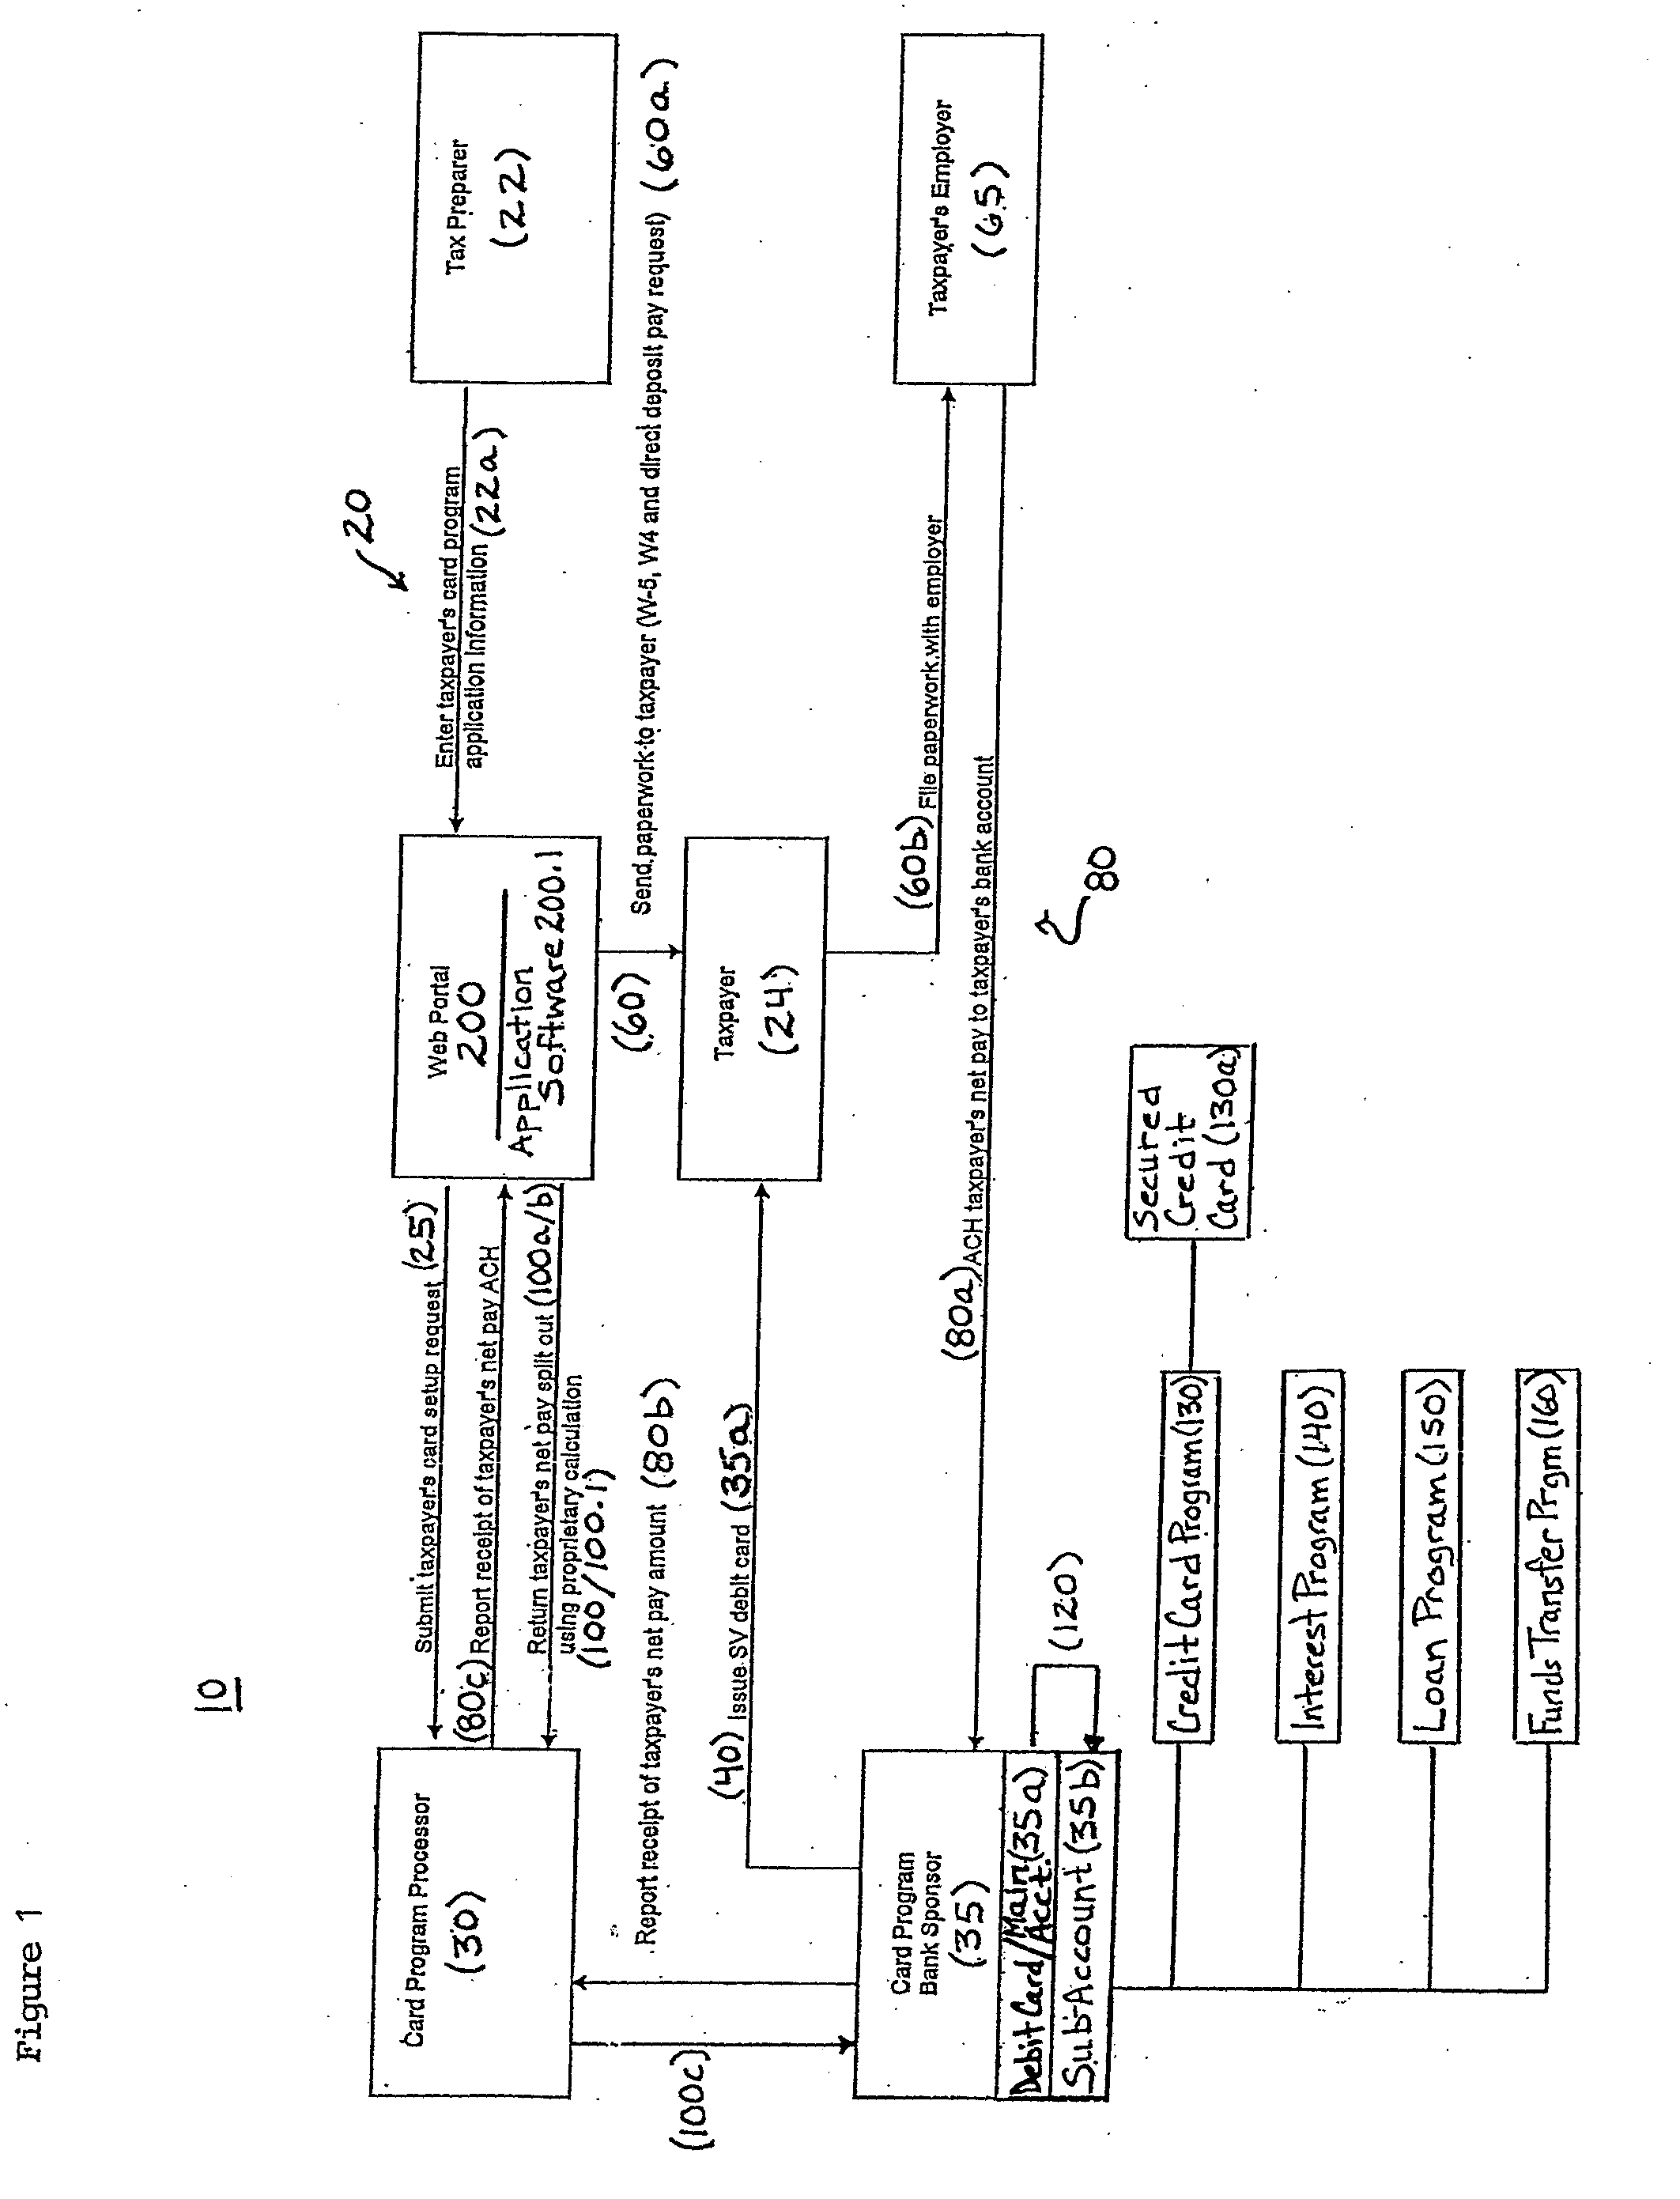 System and method for financial management of advance earned income credit